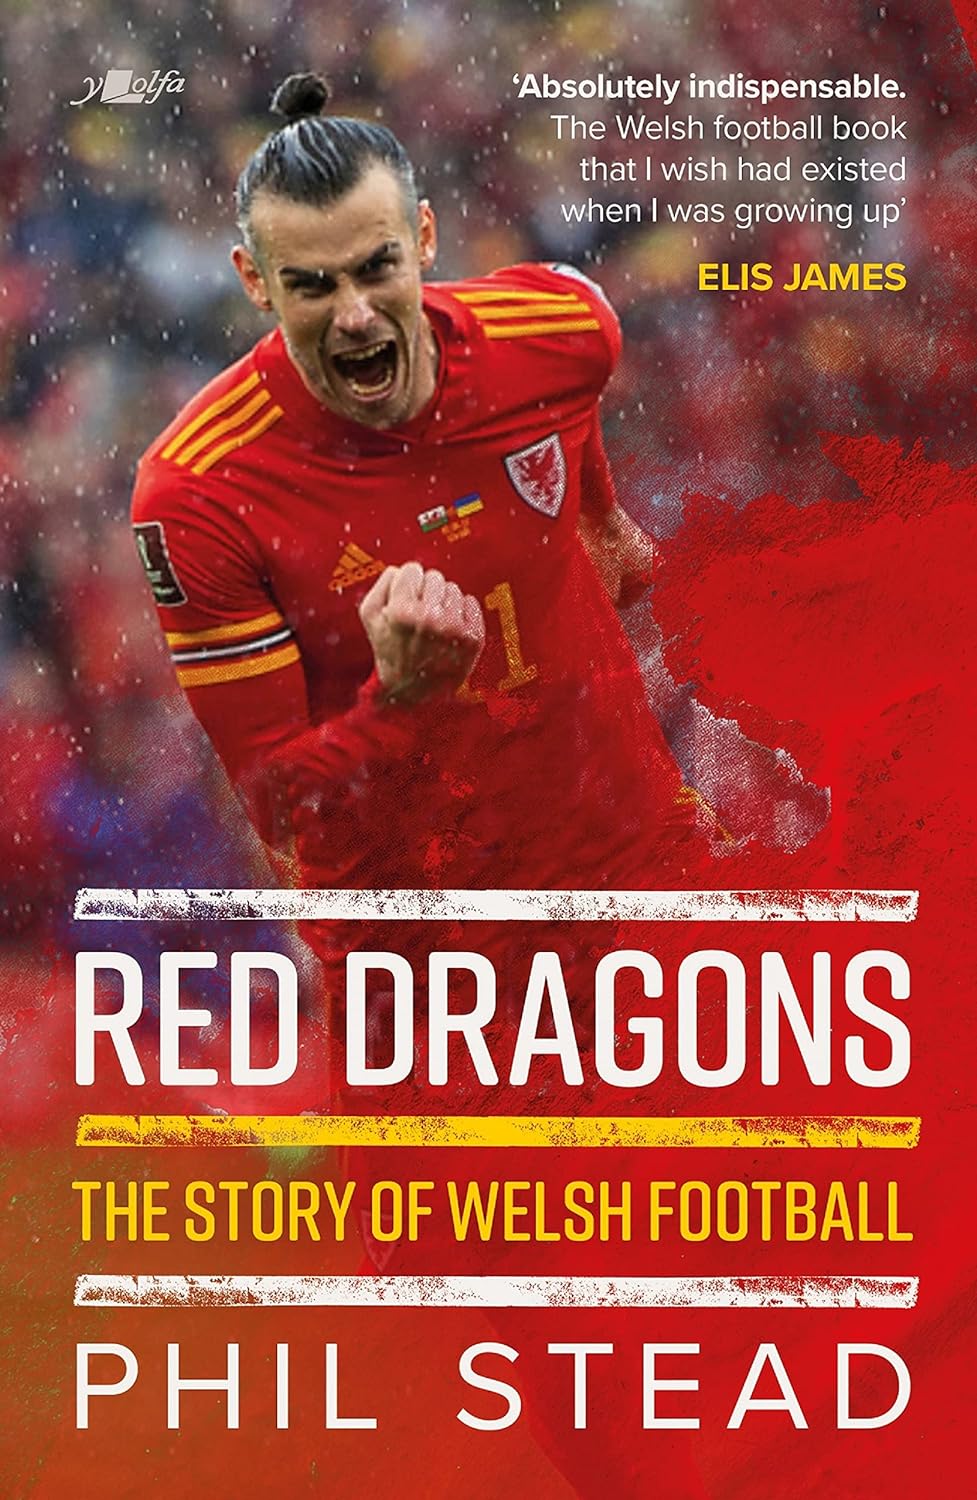 Book - Red Dragons: The Story of Welsh Football - Paperback